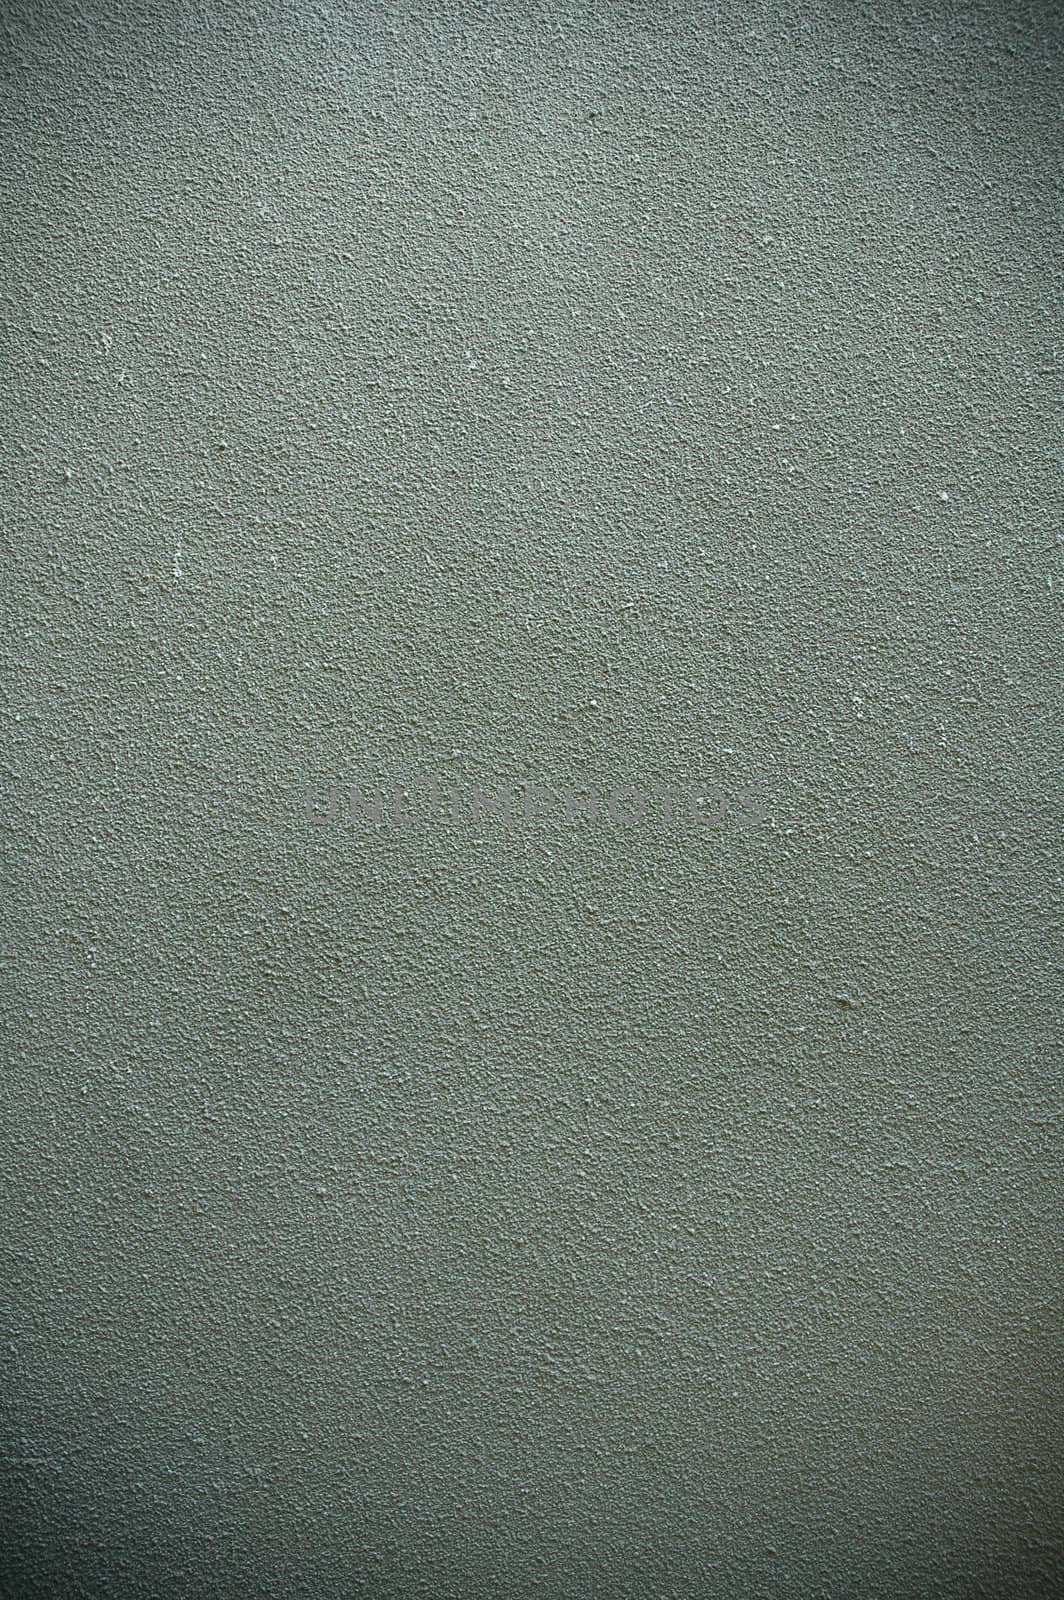 textured of concrete wall by anankkml